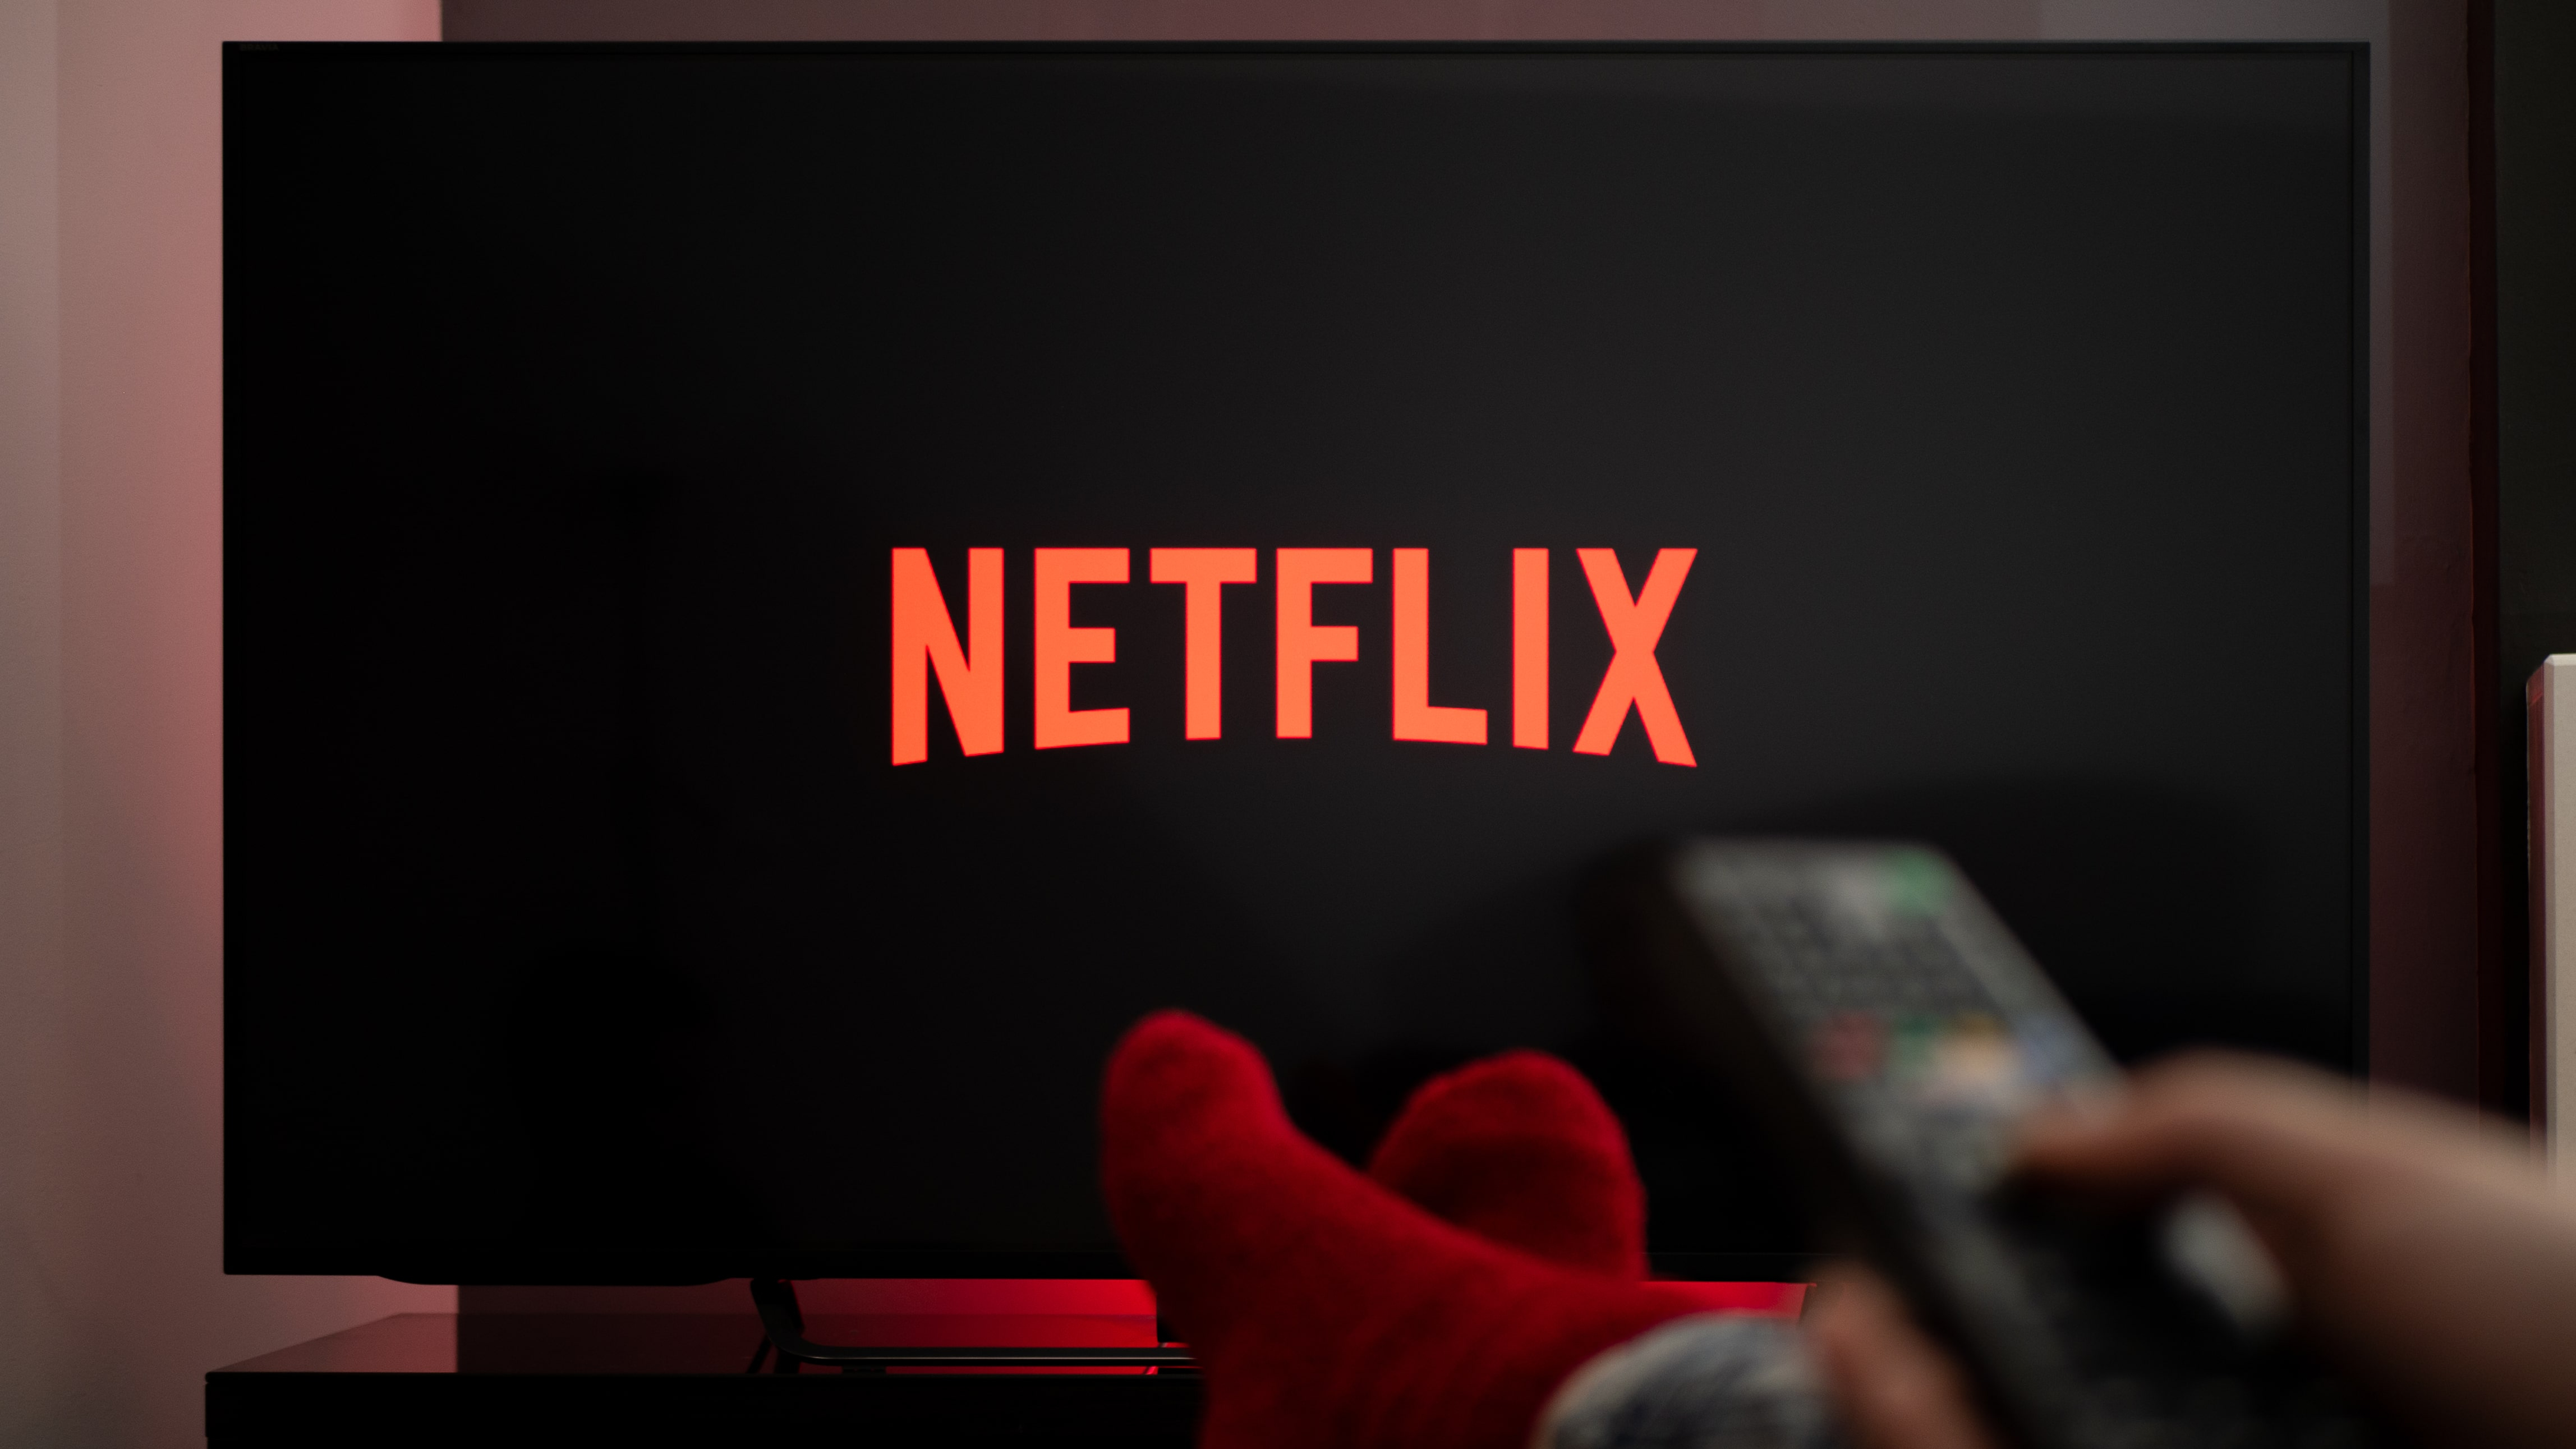 Man with his feet up on a table while watching Netflix on TV